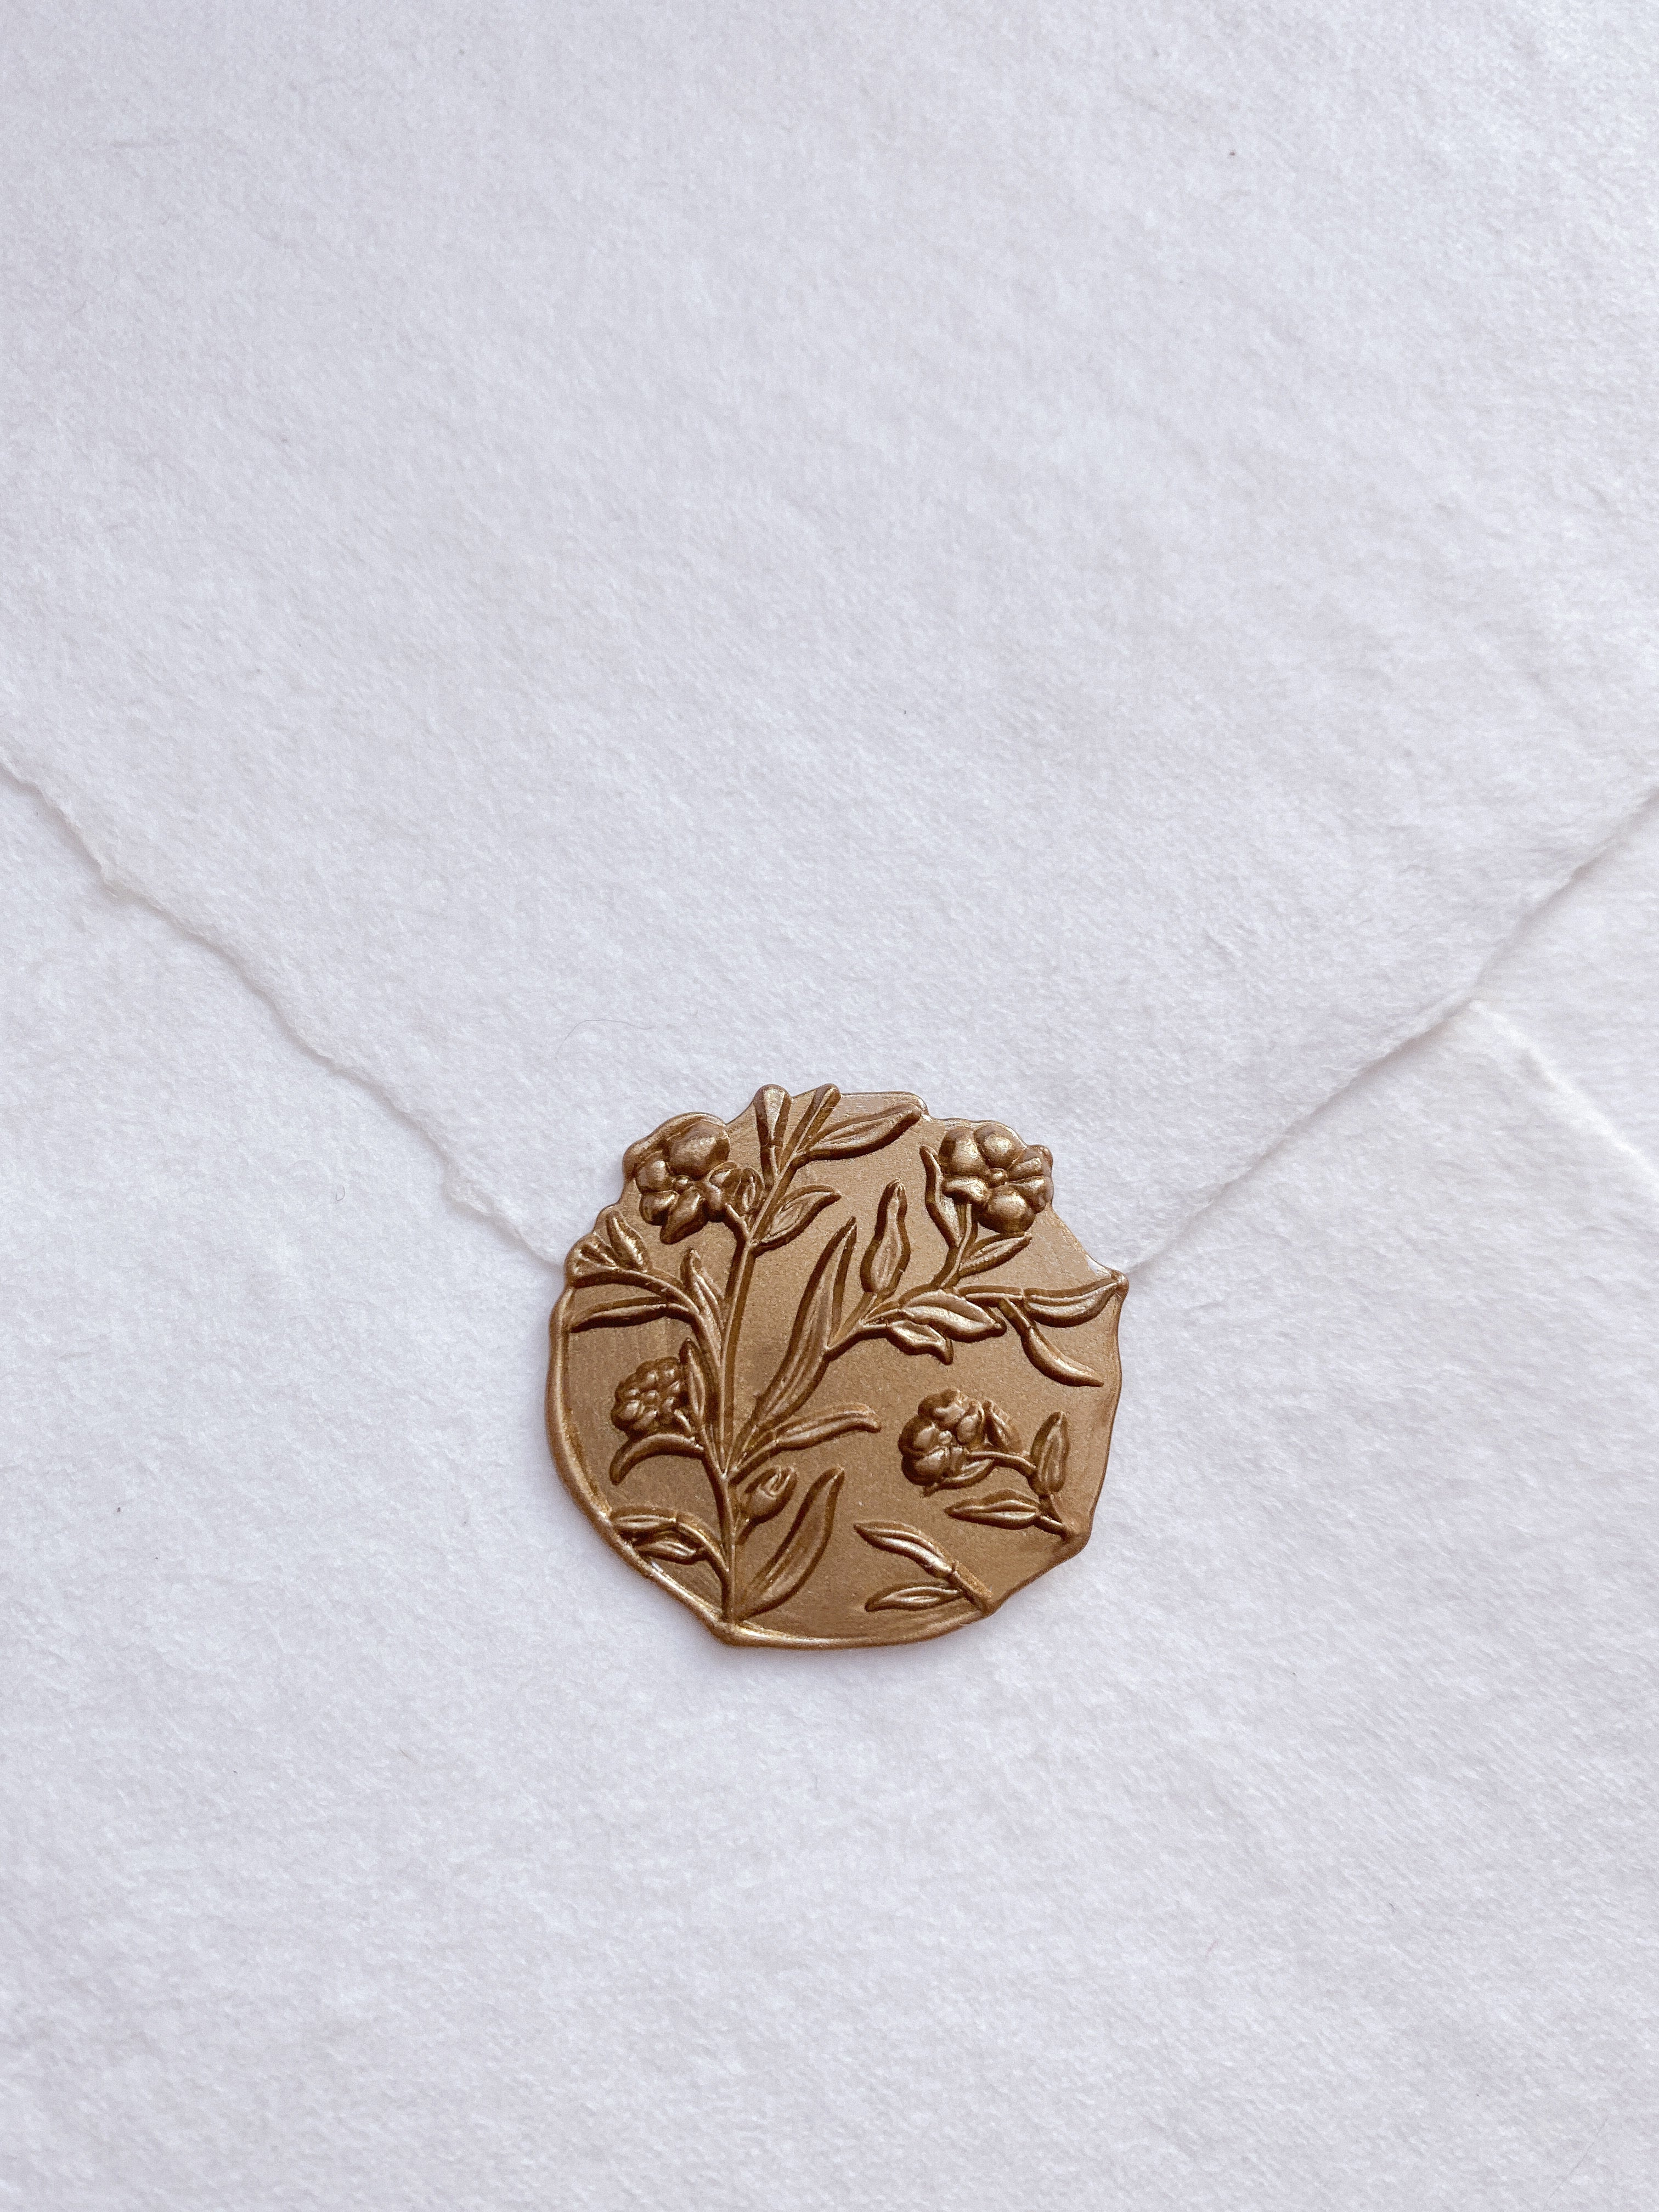 Taoskai Leaves Floral Wax Seal Stamp, Vintage Oval Removable Brass Wax  Stamp Head Sealing Stamp for Invitations, Gift Wrapping, Envelopes, Cards,  Wine